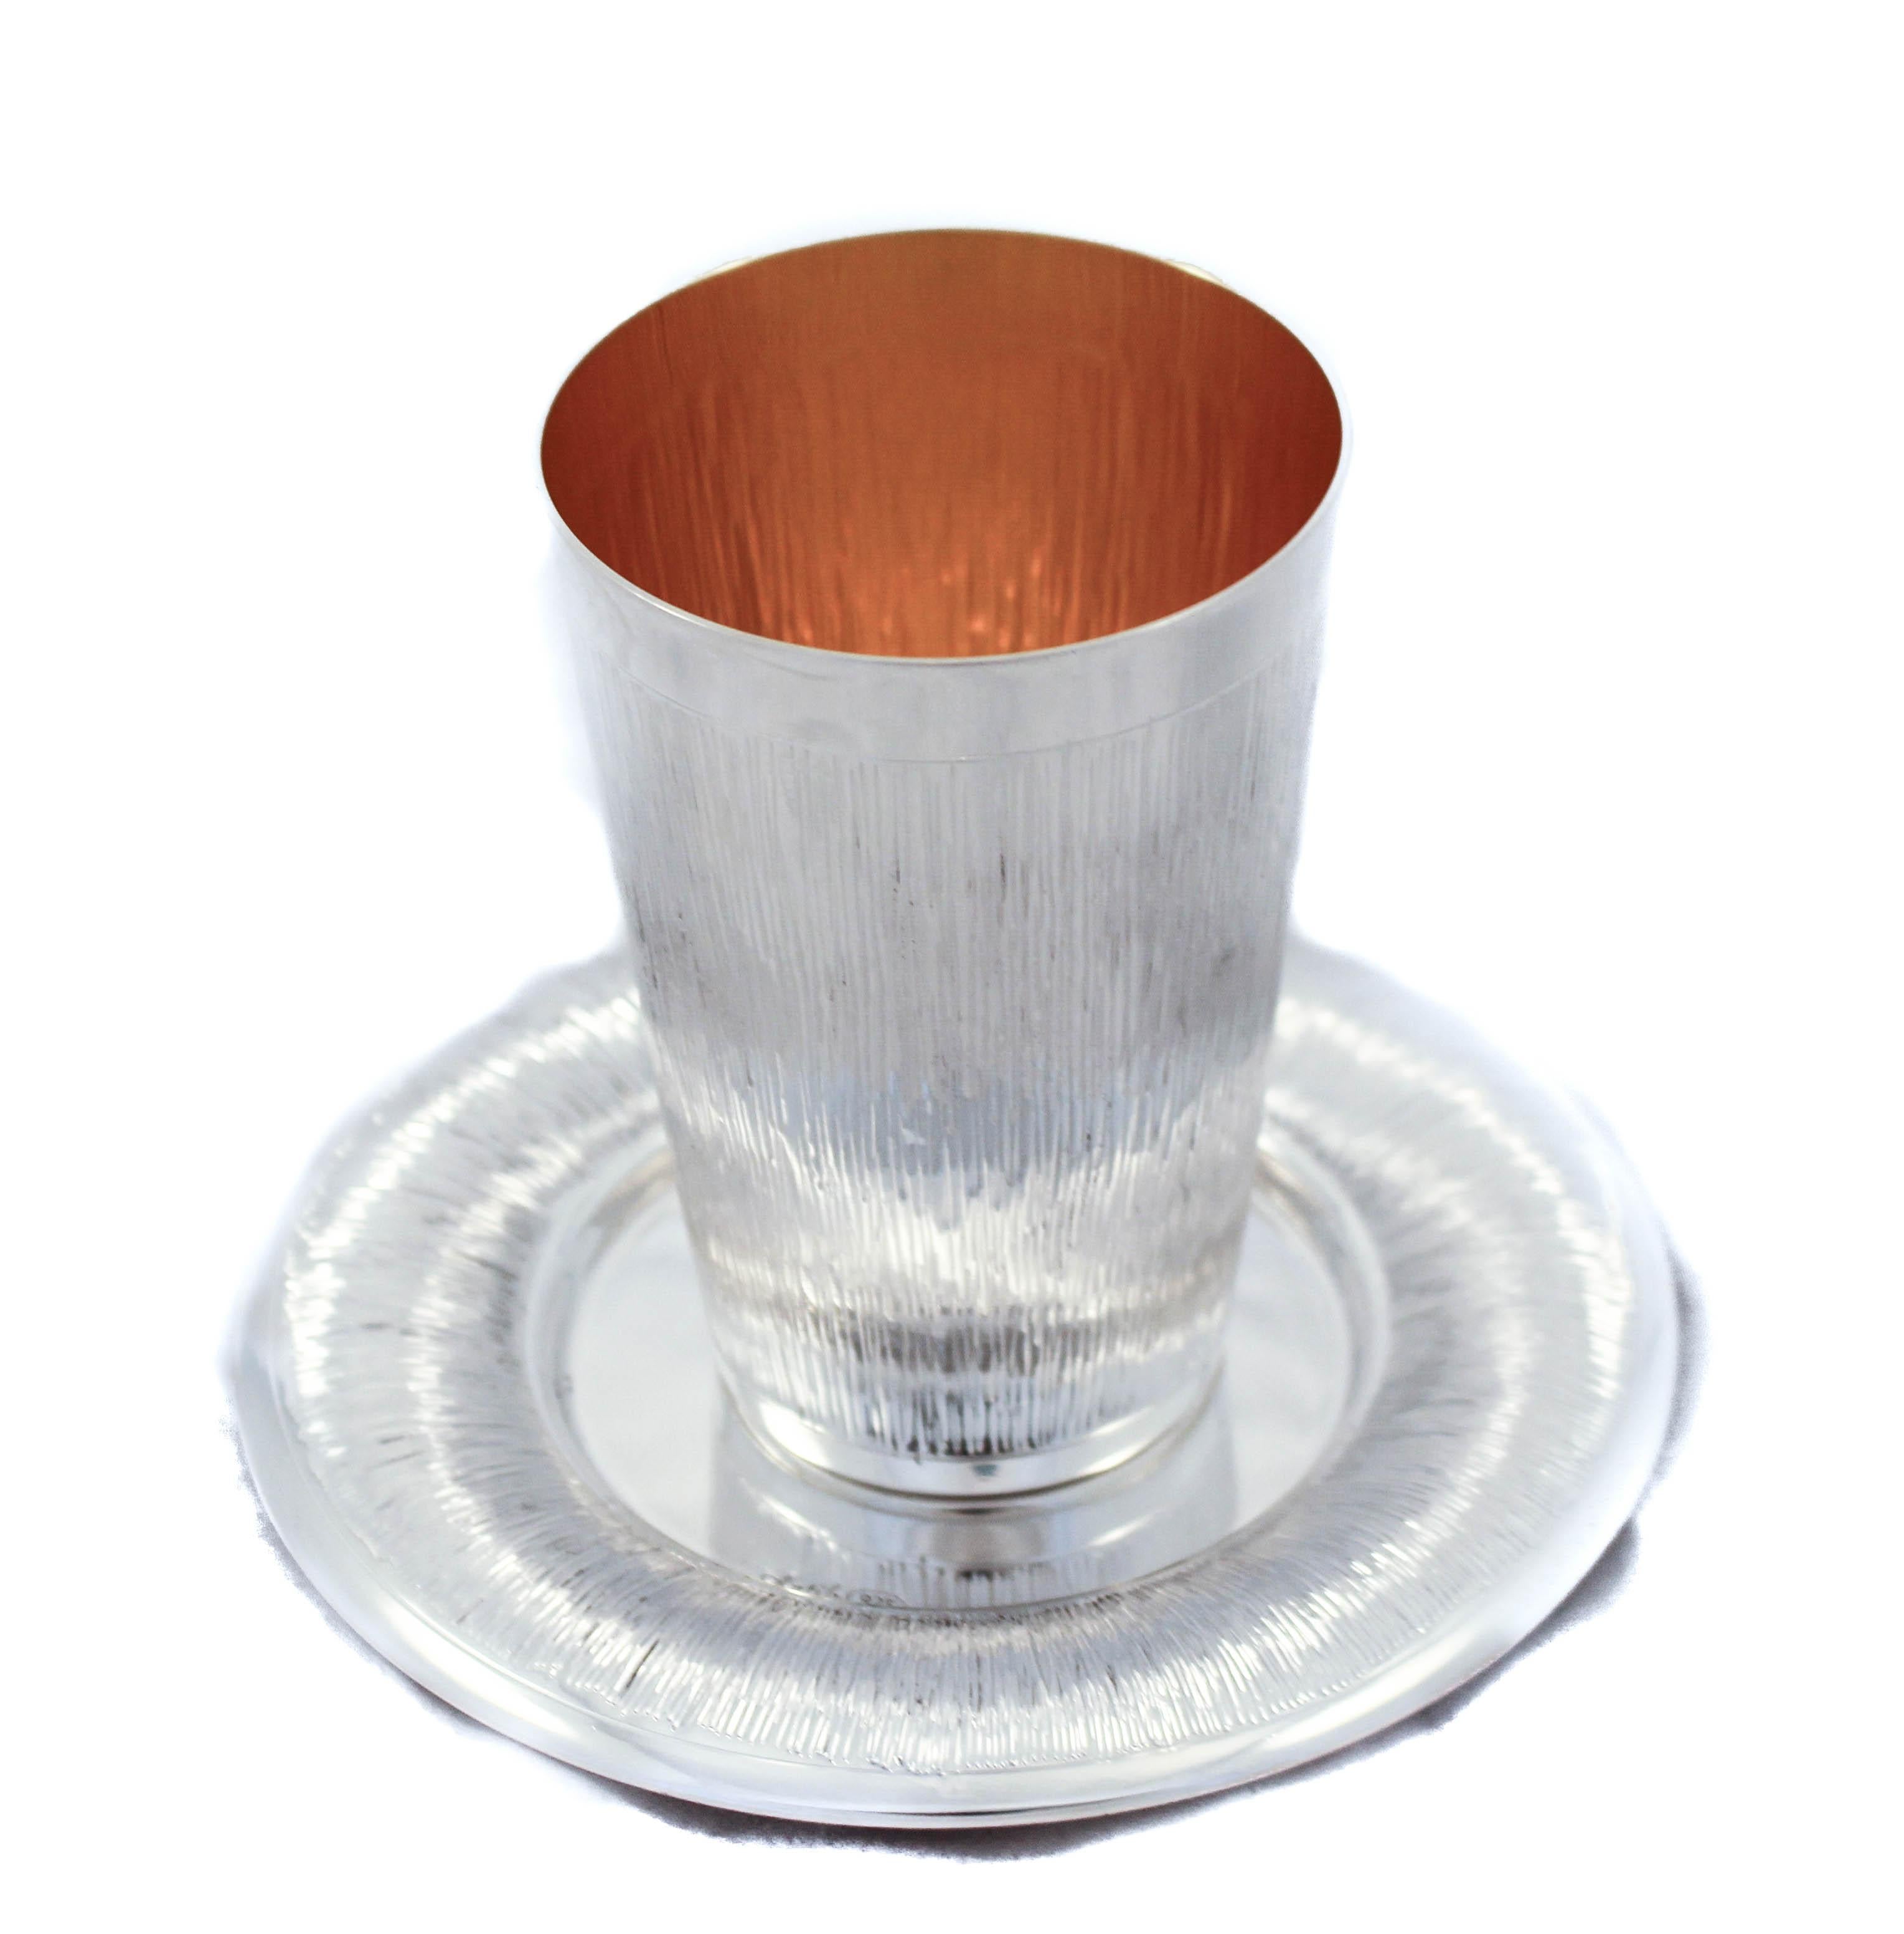 We are happy to offer you this sterling silver wine cup and plate. It has a masculine striped design with a matte finish. The plate has the same design along the edge. The inside is hold-washed to protect it from water-spots. Modern and